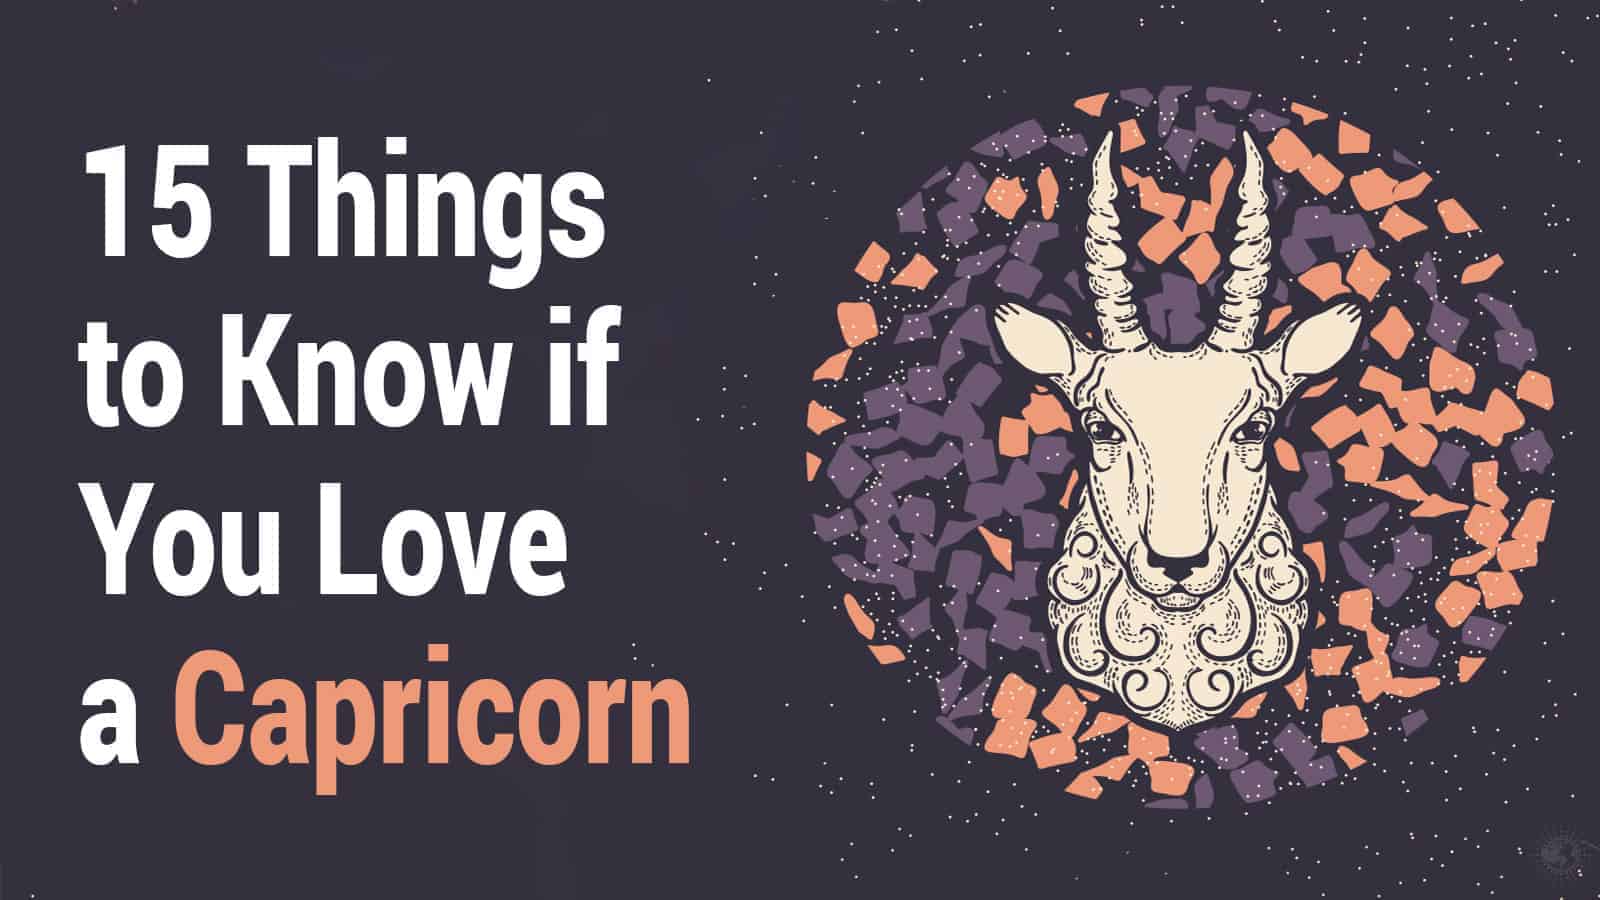 Signs that a capricorn woman likes you - ðŸ§¡ Pin by Rosa Hawk on Capricorn W...